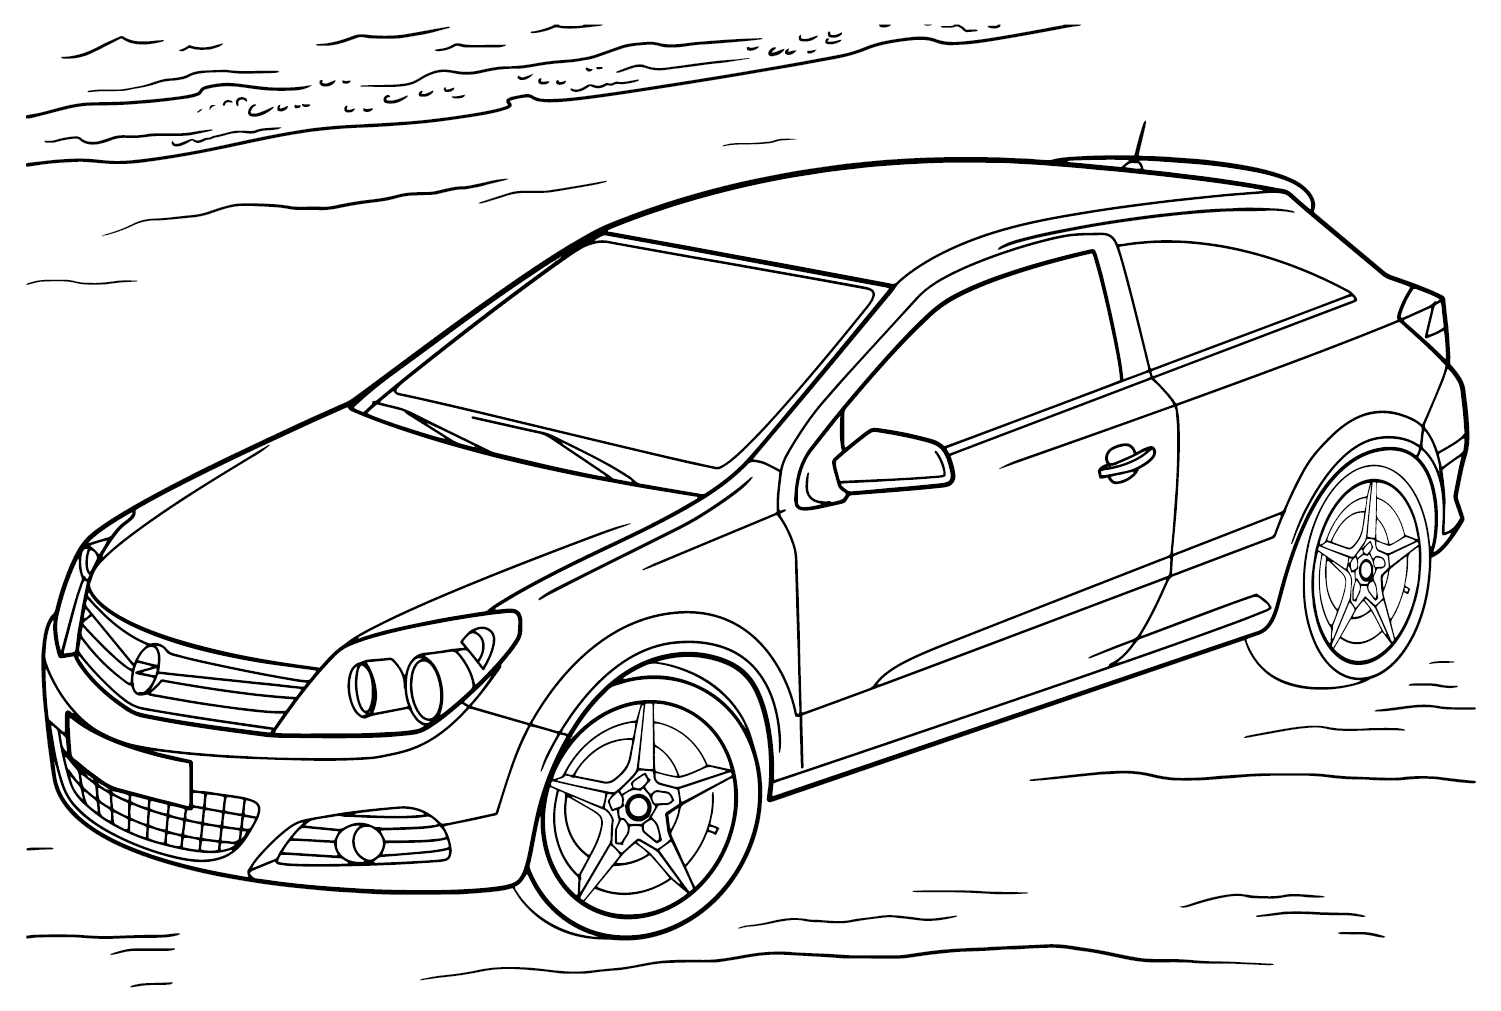 Free Opel Astra Coloring Page from Opel